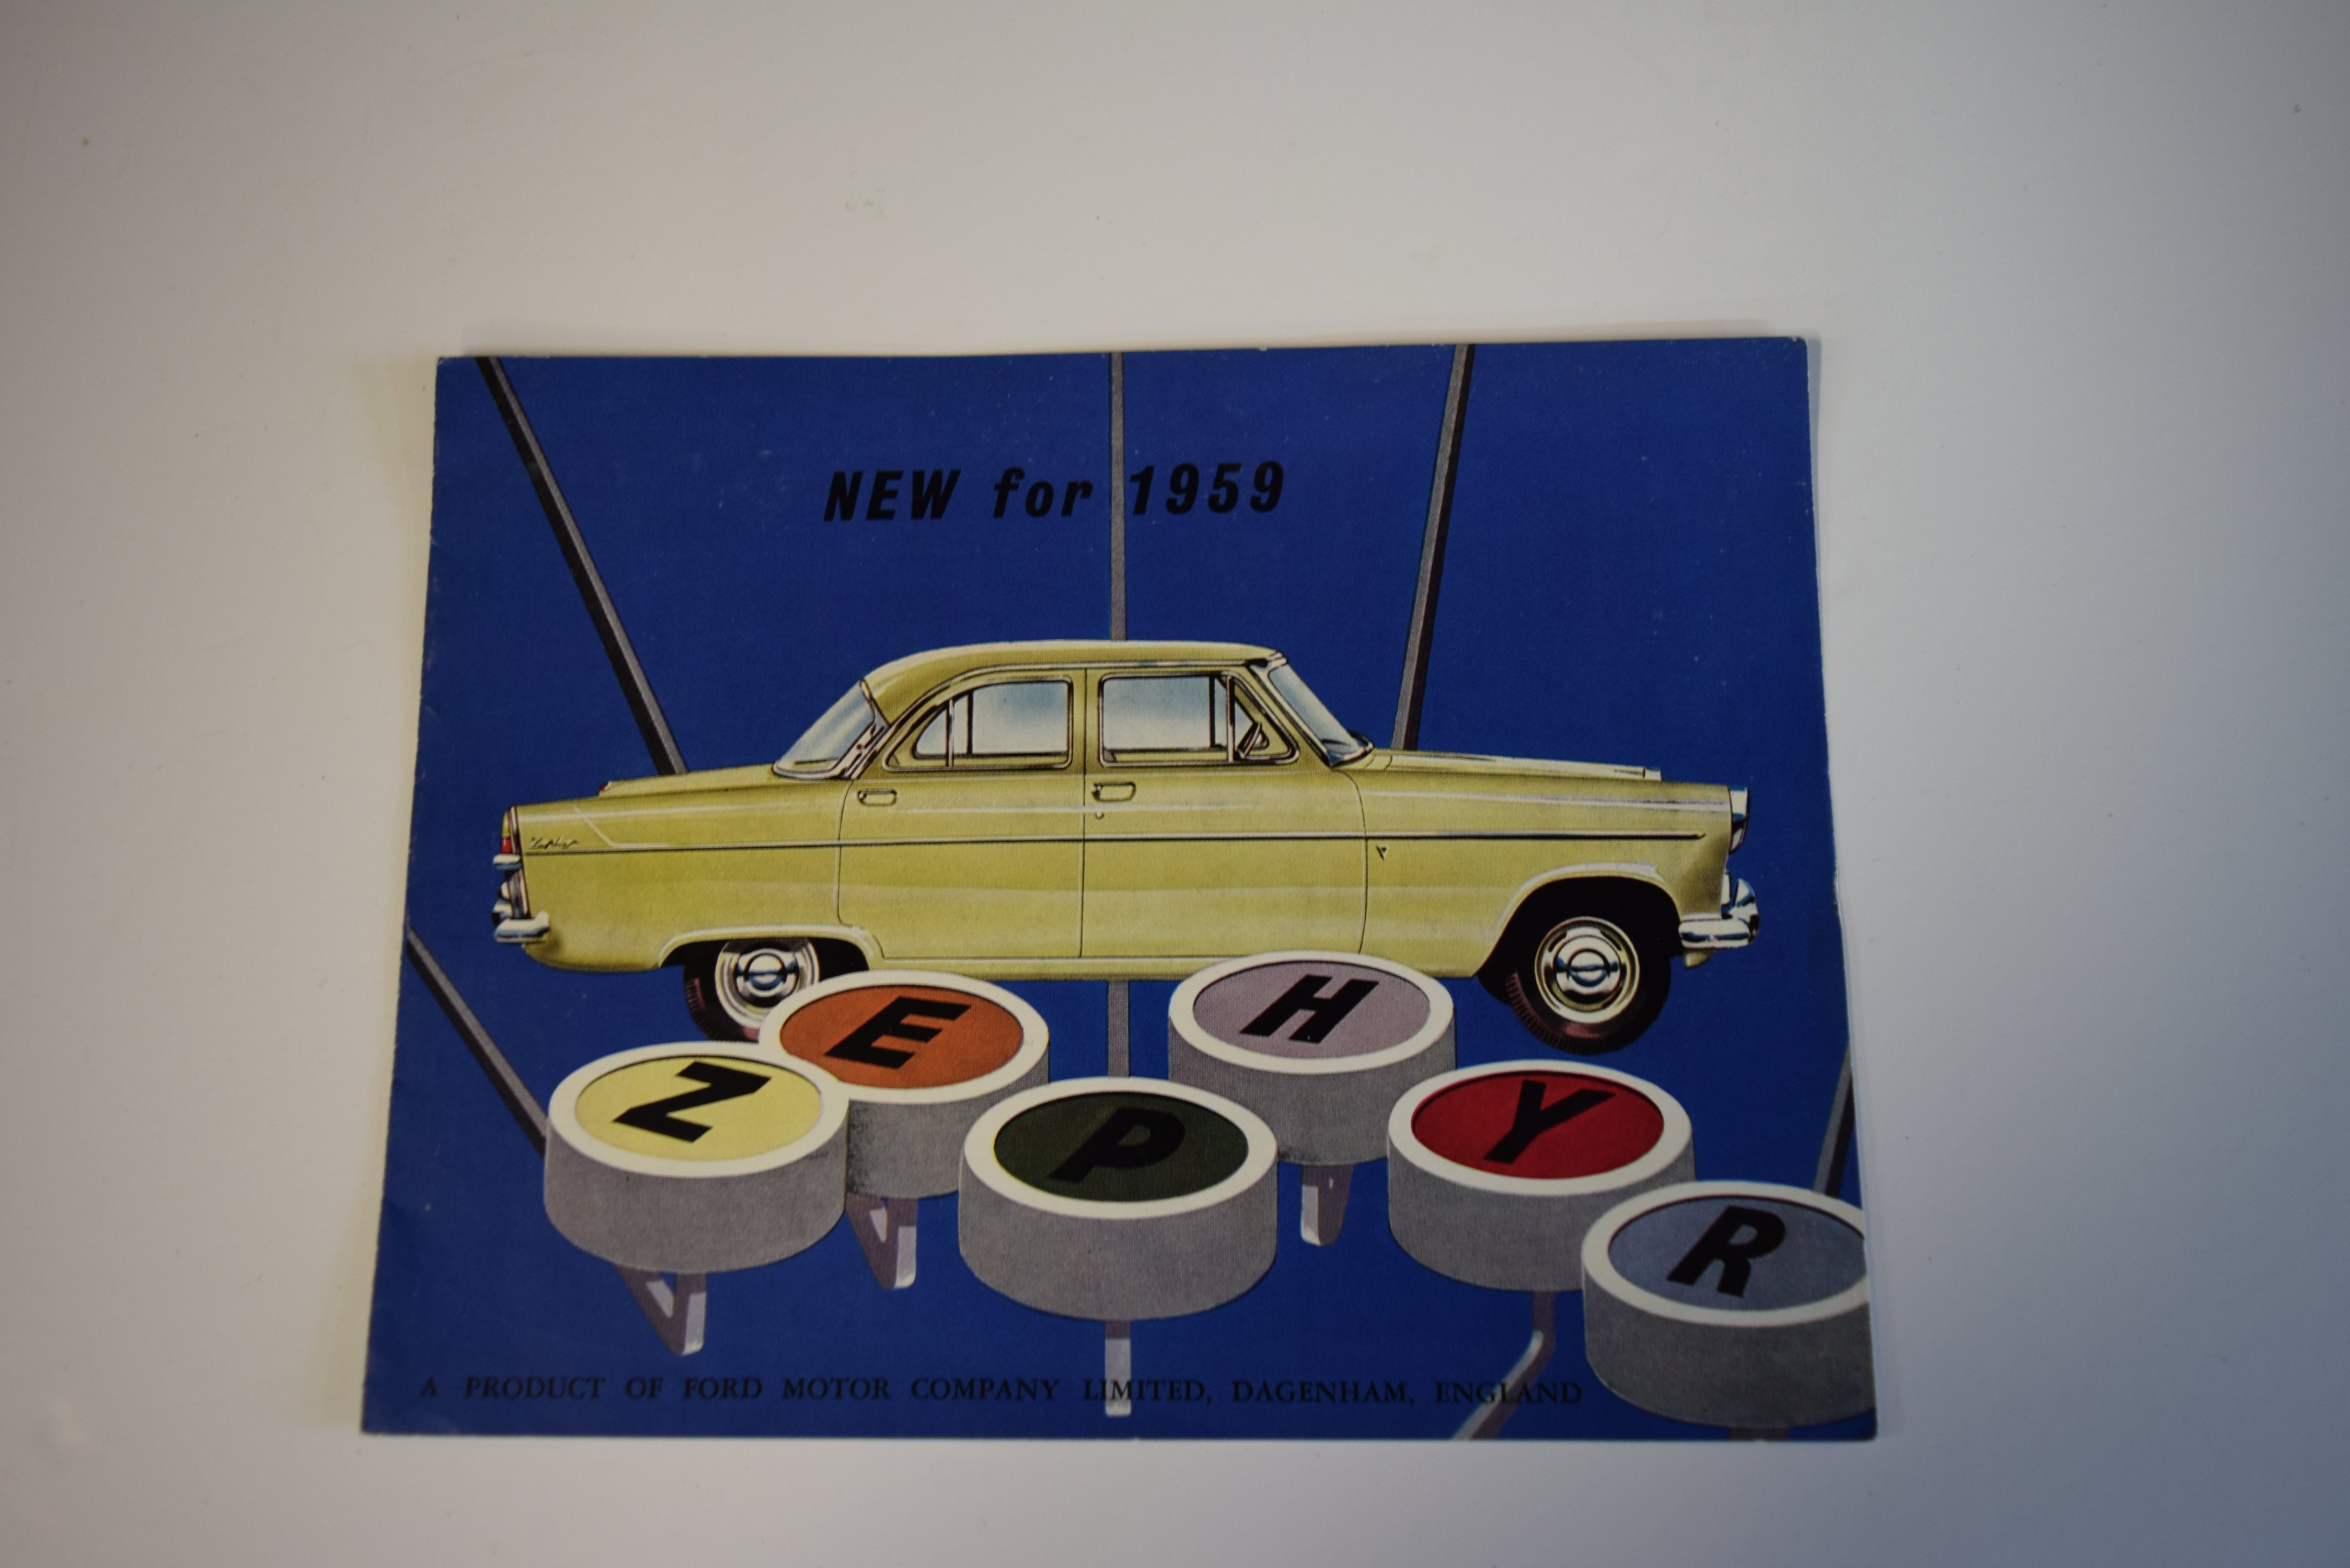 MOTORING BROCHURES: a collection of approx 28 vintage motoring brochures and advertisements, - Image 3 of 5